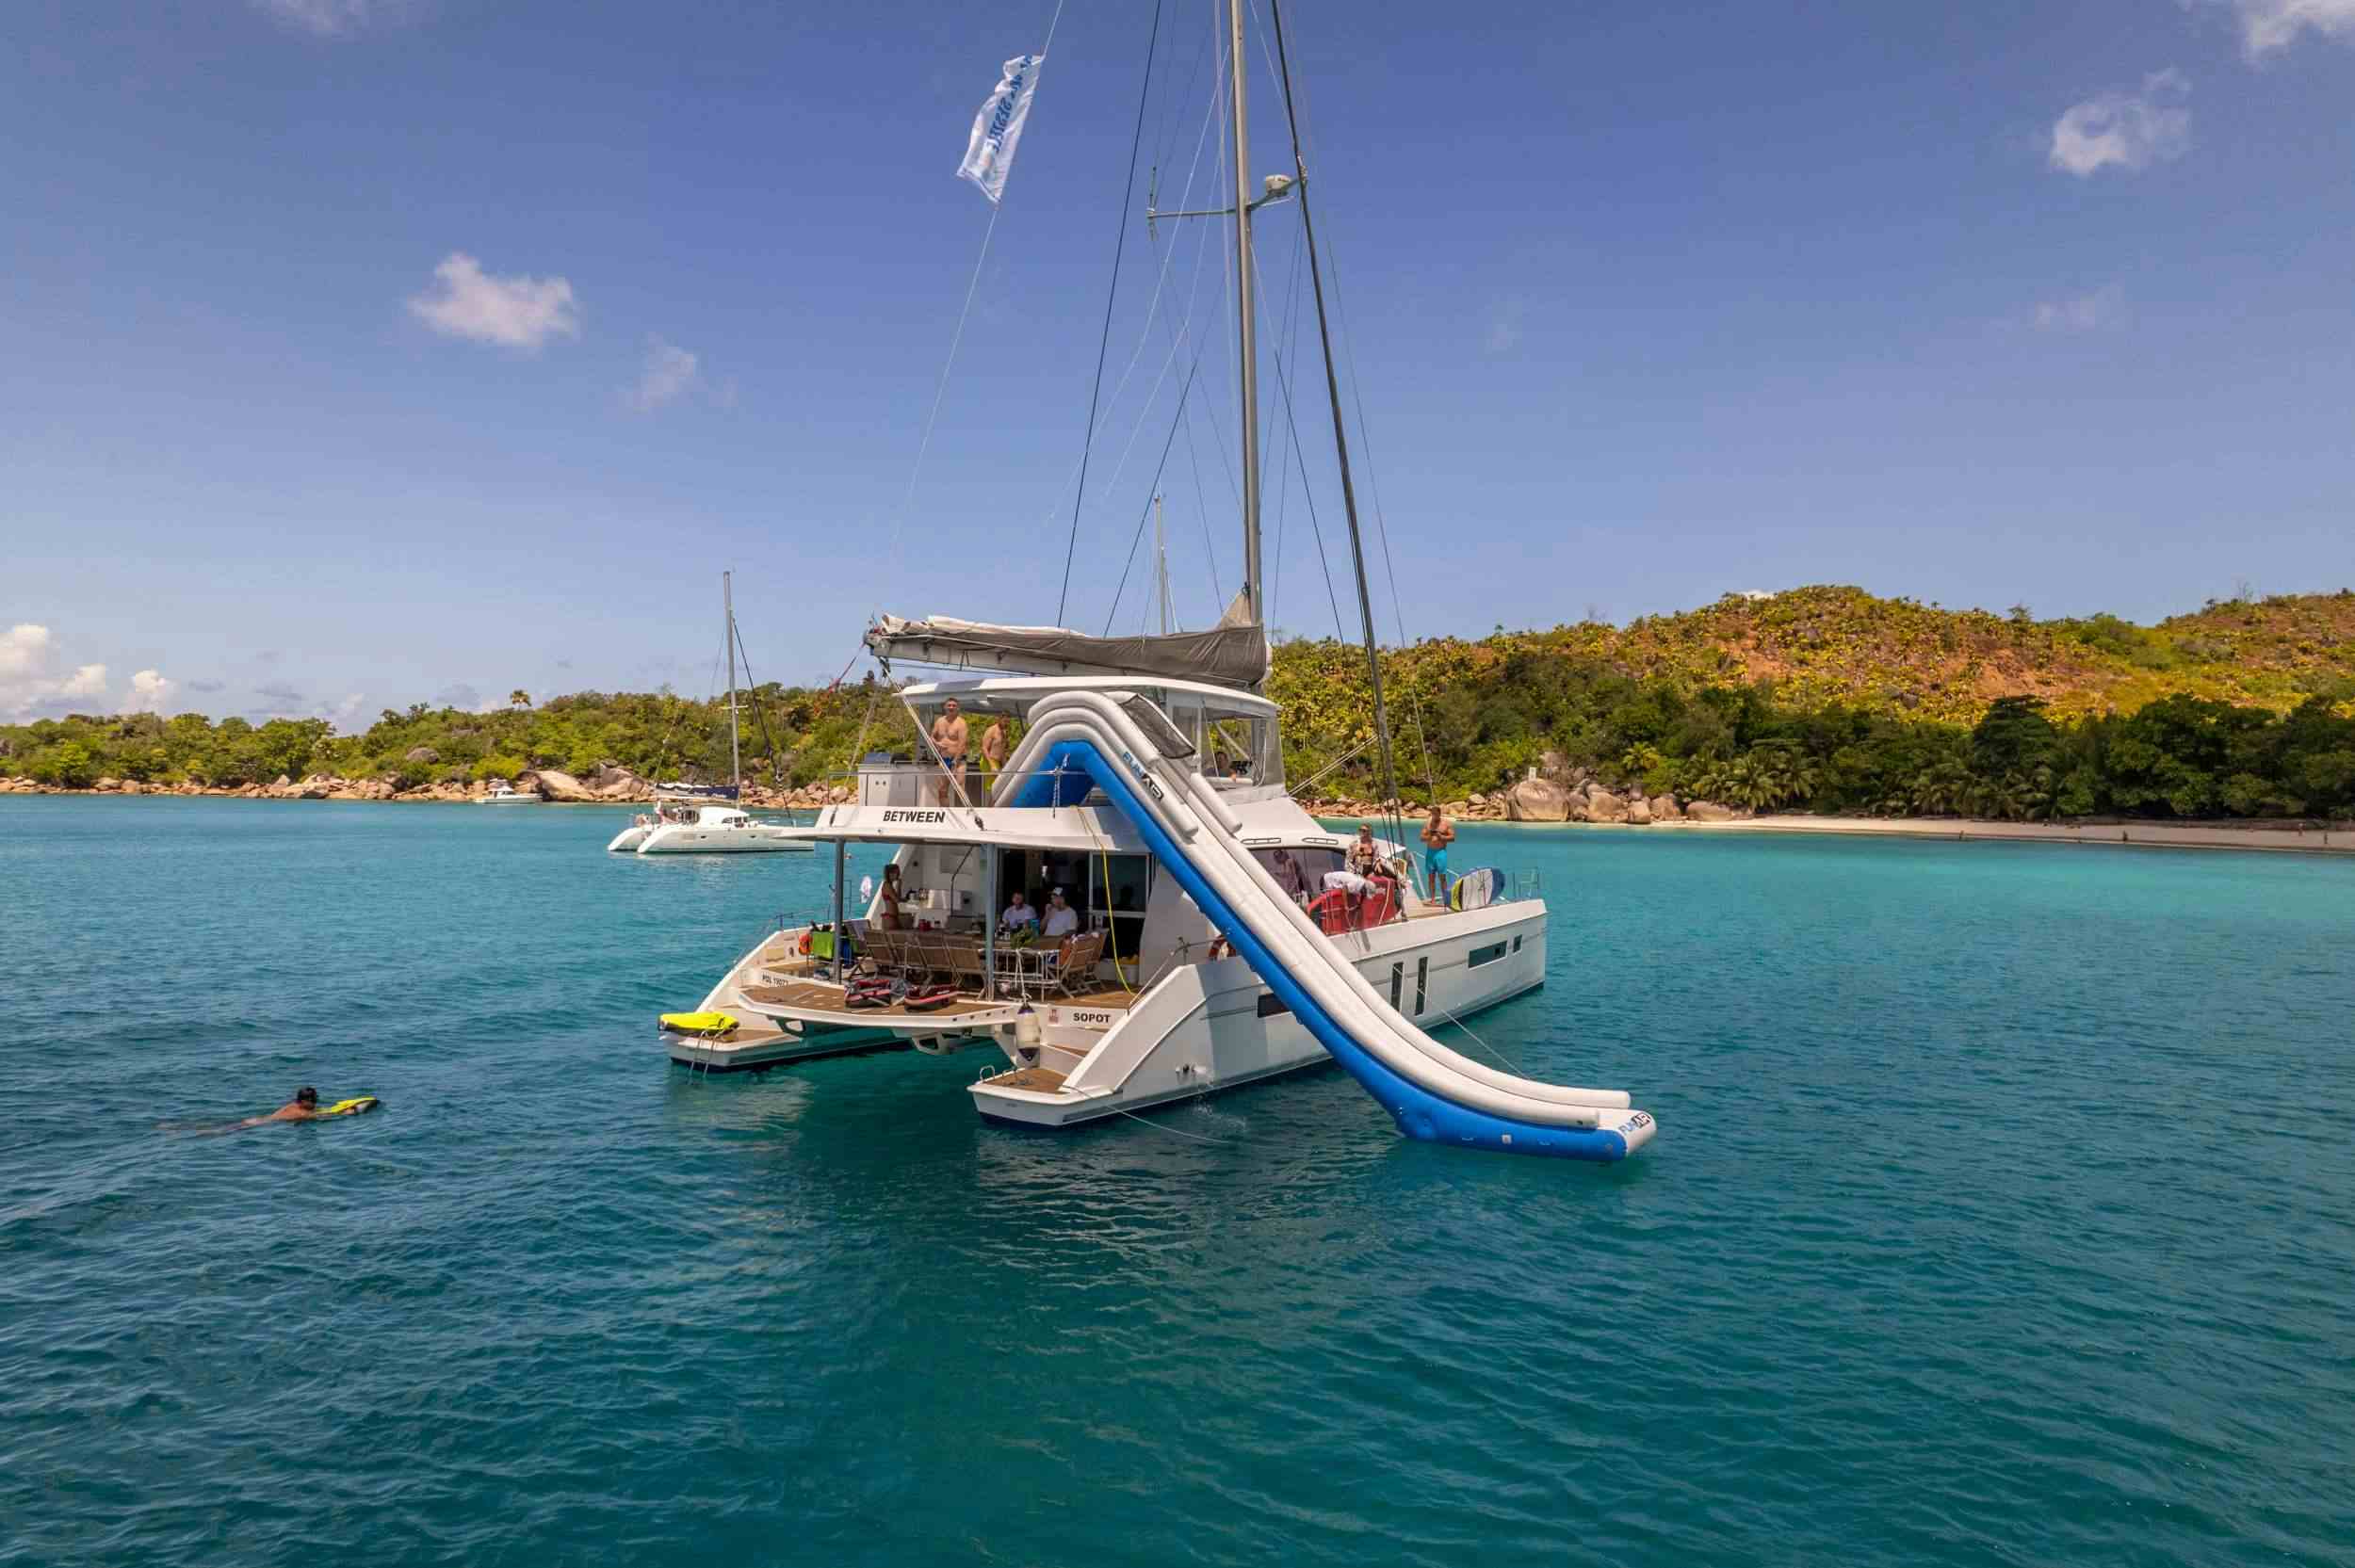 BETWEEN - Yacht Charter Philippines & Boat hire in Indian Ocean & SE Asia 1